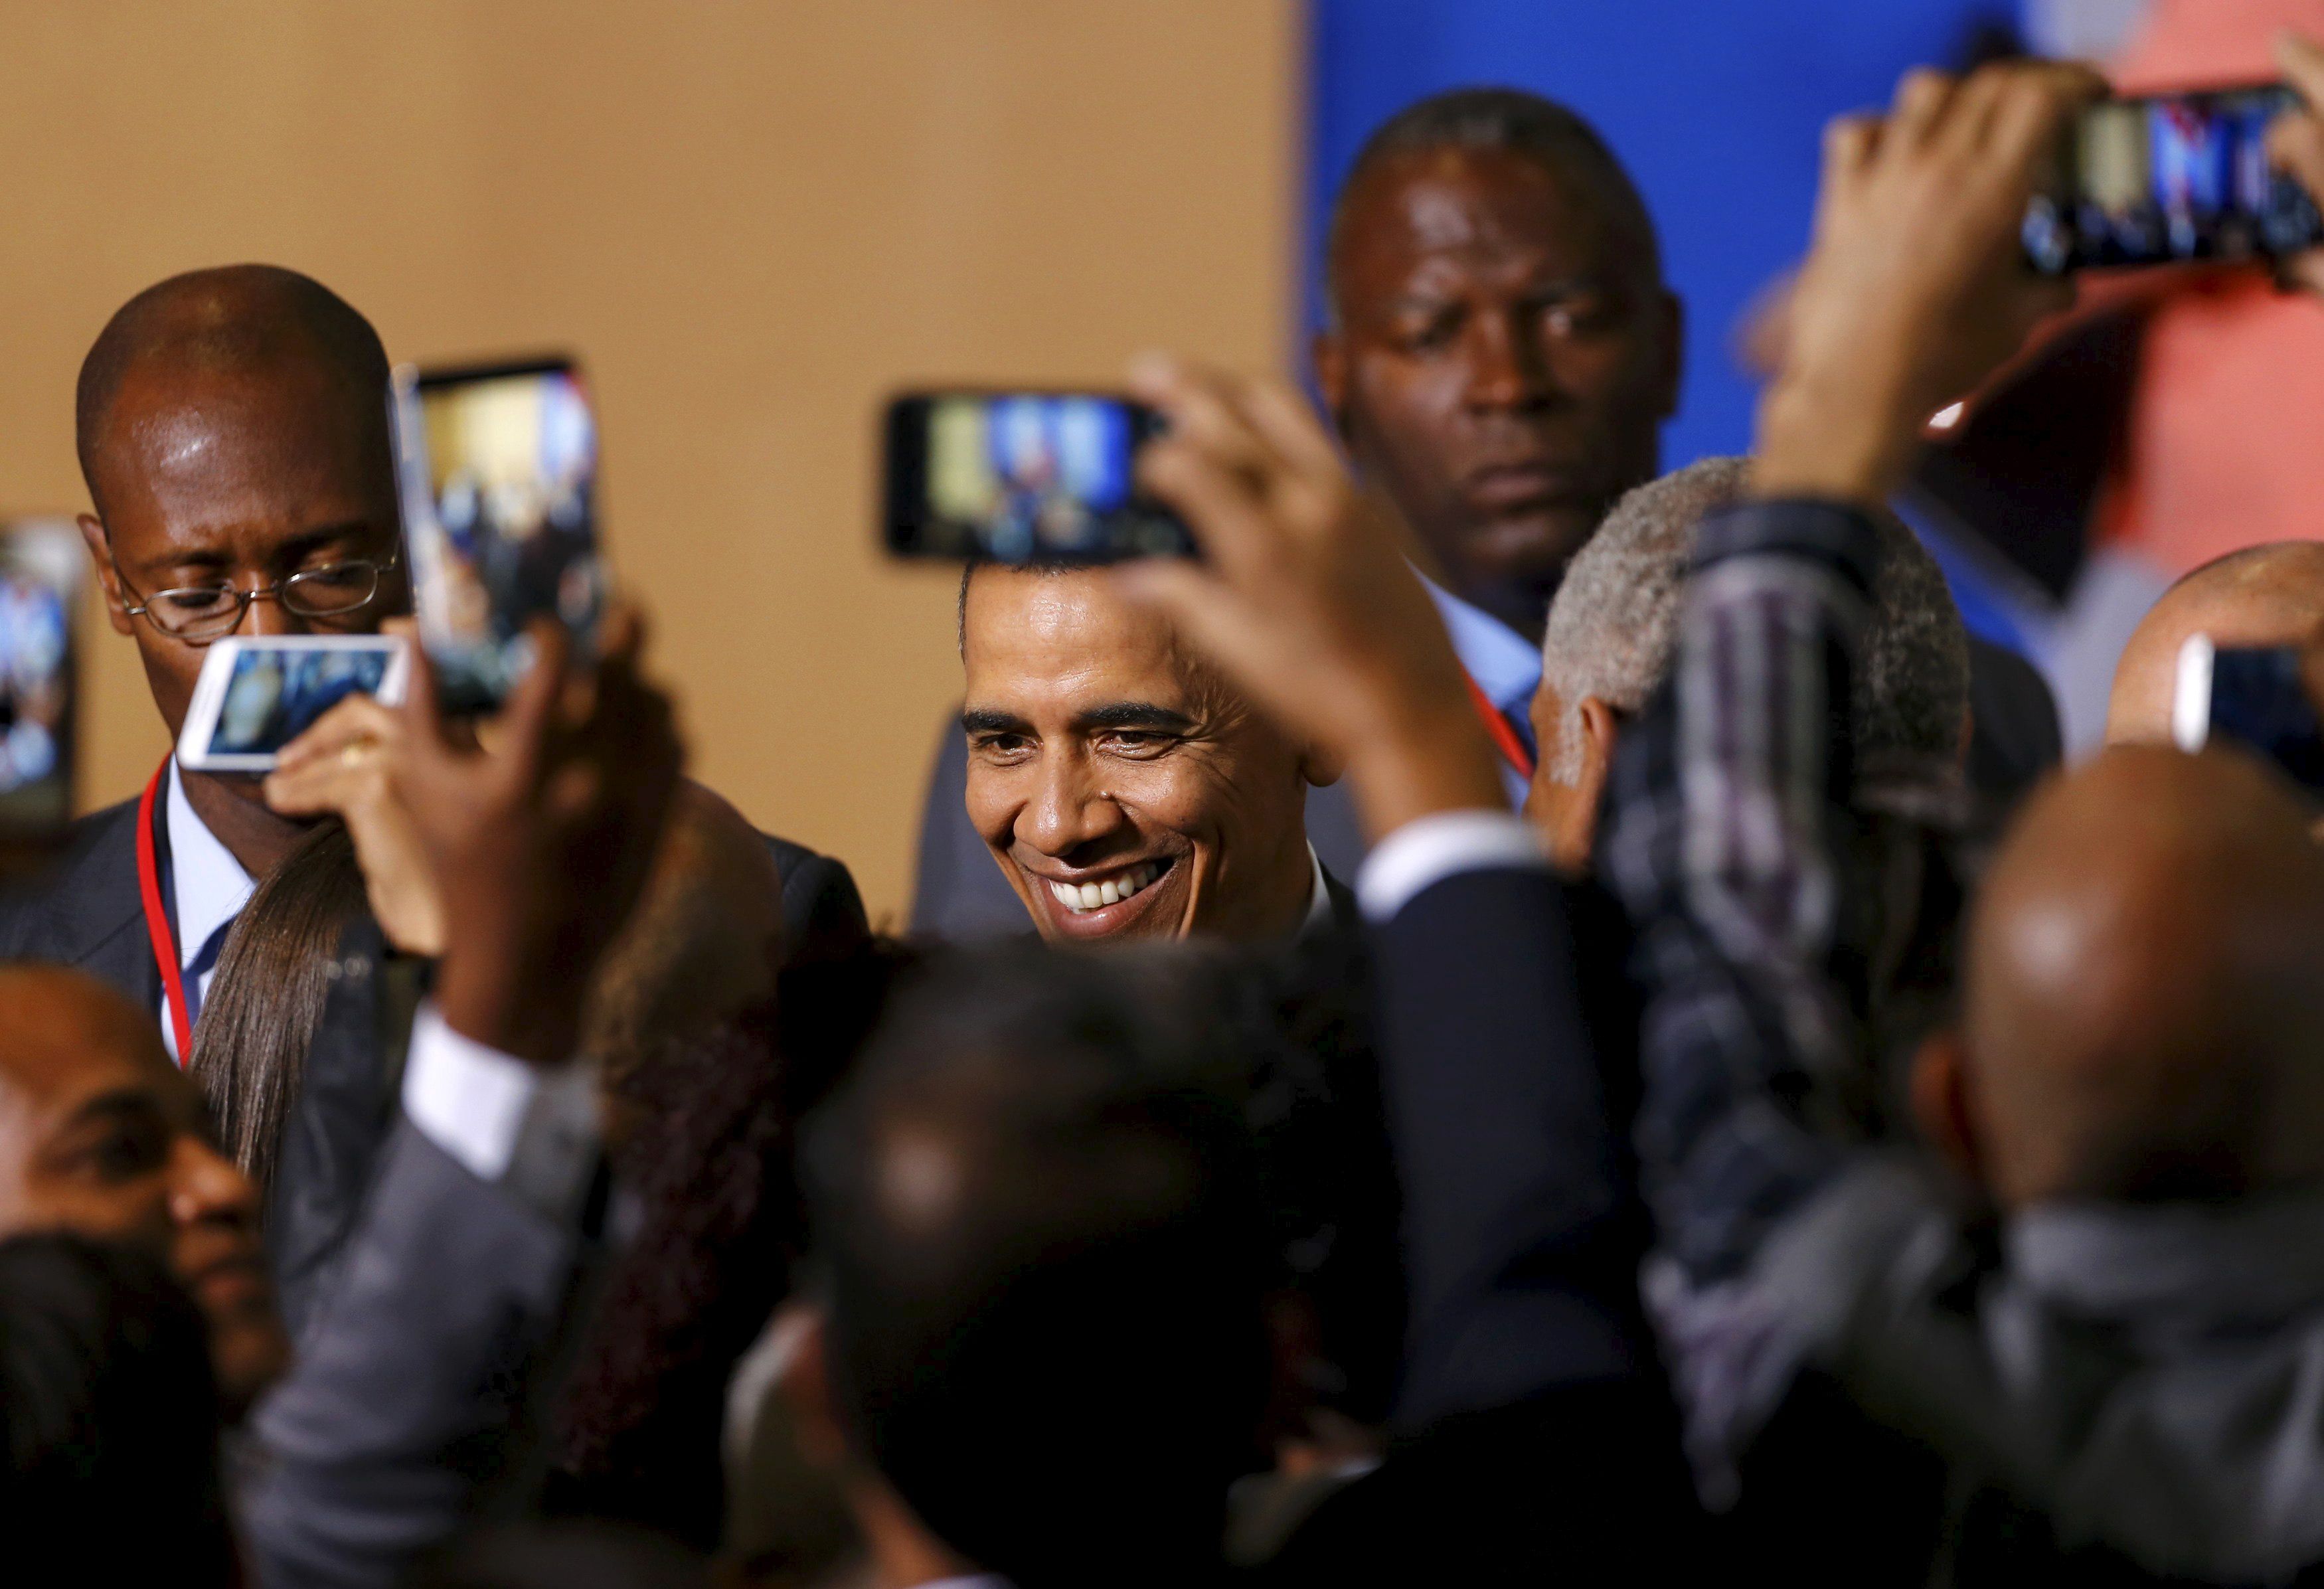 People take pictures of U.S. President Barack Obama (C) as he attends a meeting with entrepreneurs as part of his three-day visit to Cuba, in Havana March 21, 2016. REUTERS/Ivan Alvarado TPX IMAGES OF THE DAY - RTSBKC7